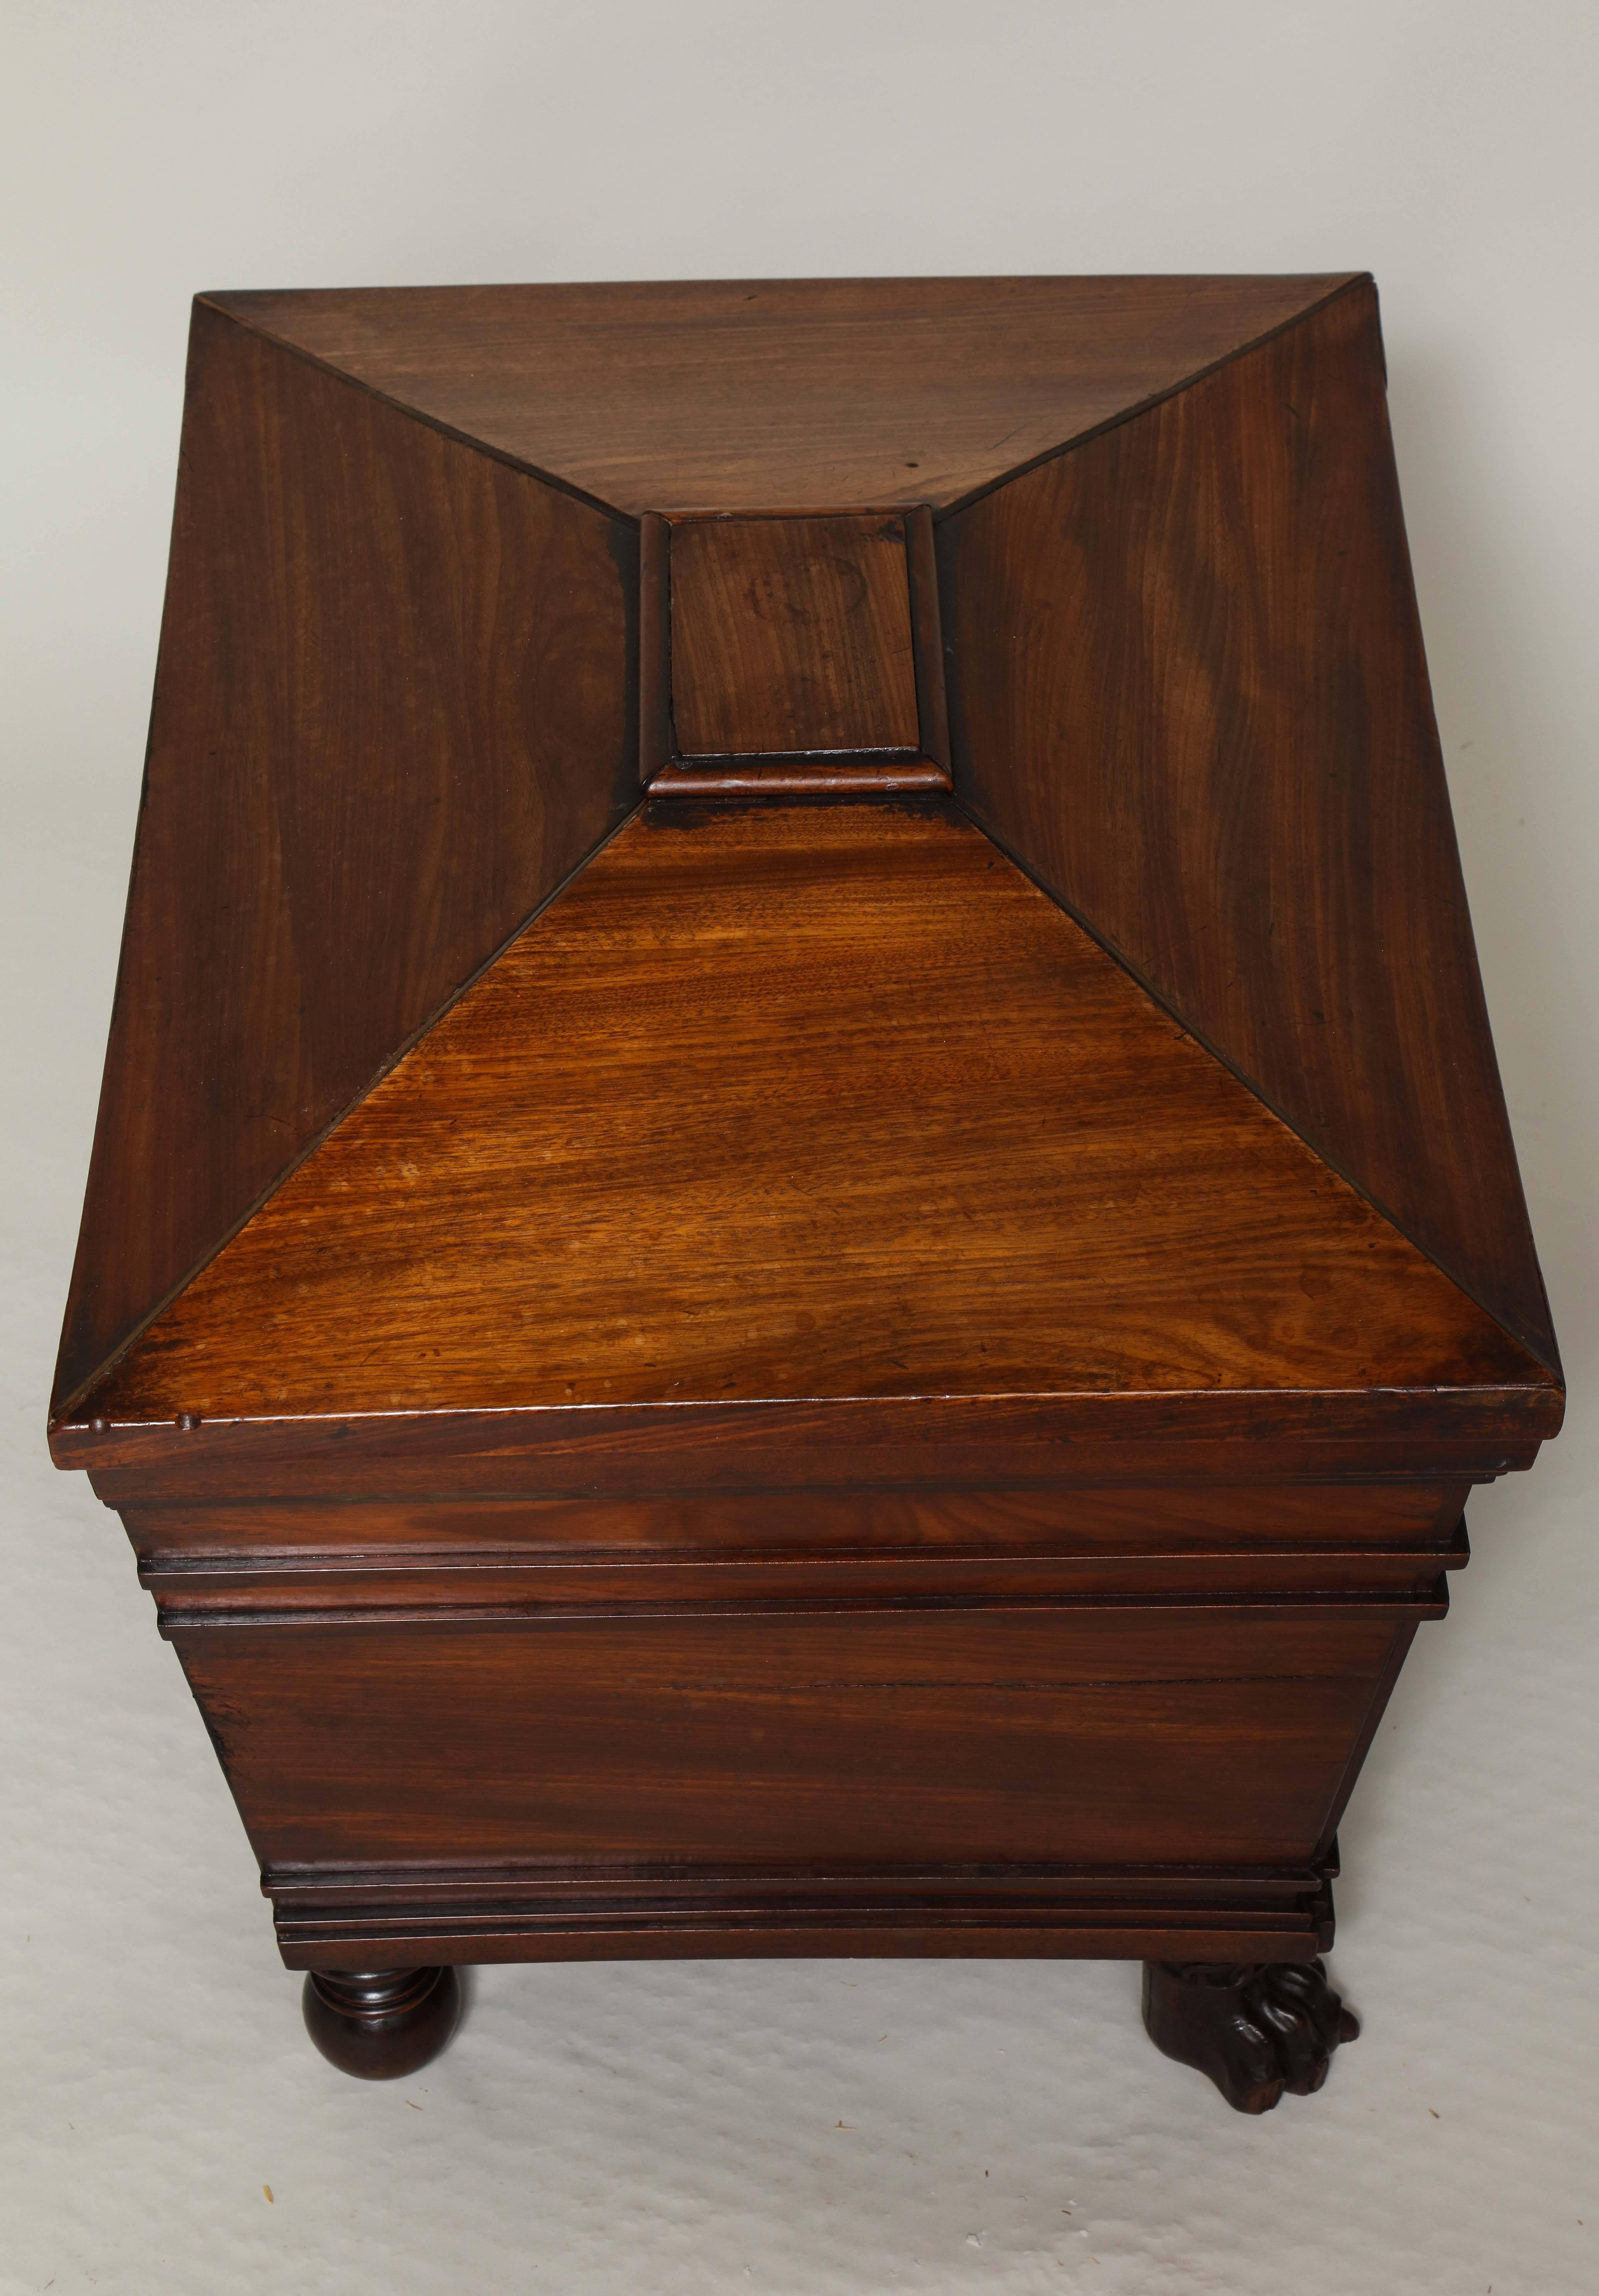 Early 19th Century Regency Mahogany Wine Cooler For Sale